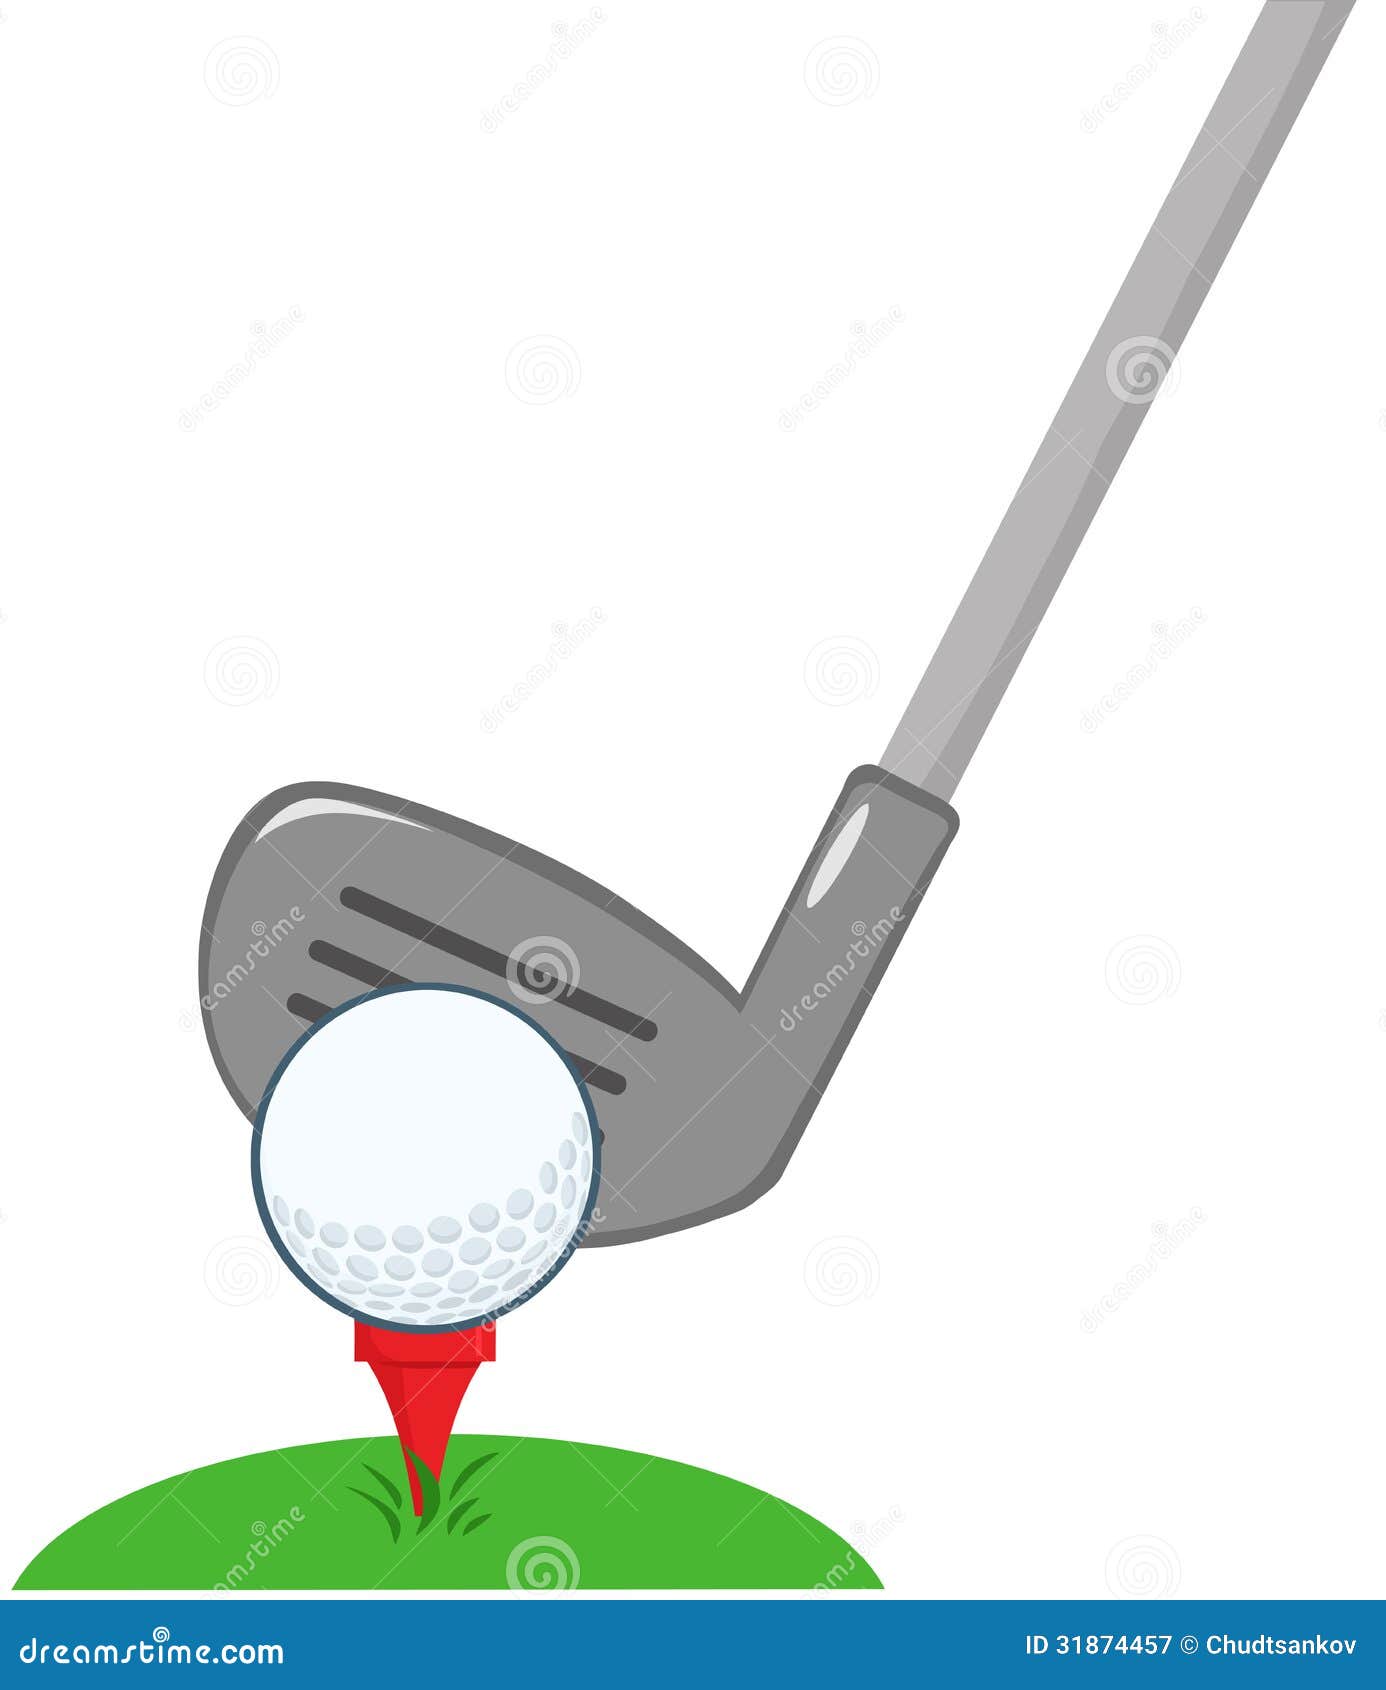 Golf Club and Ball Ready stock vector. Illustration of color - 31874457